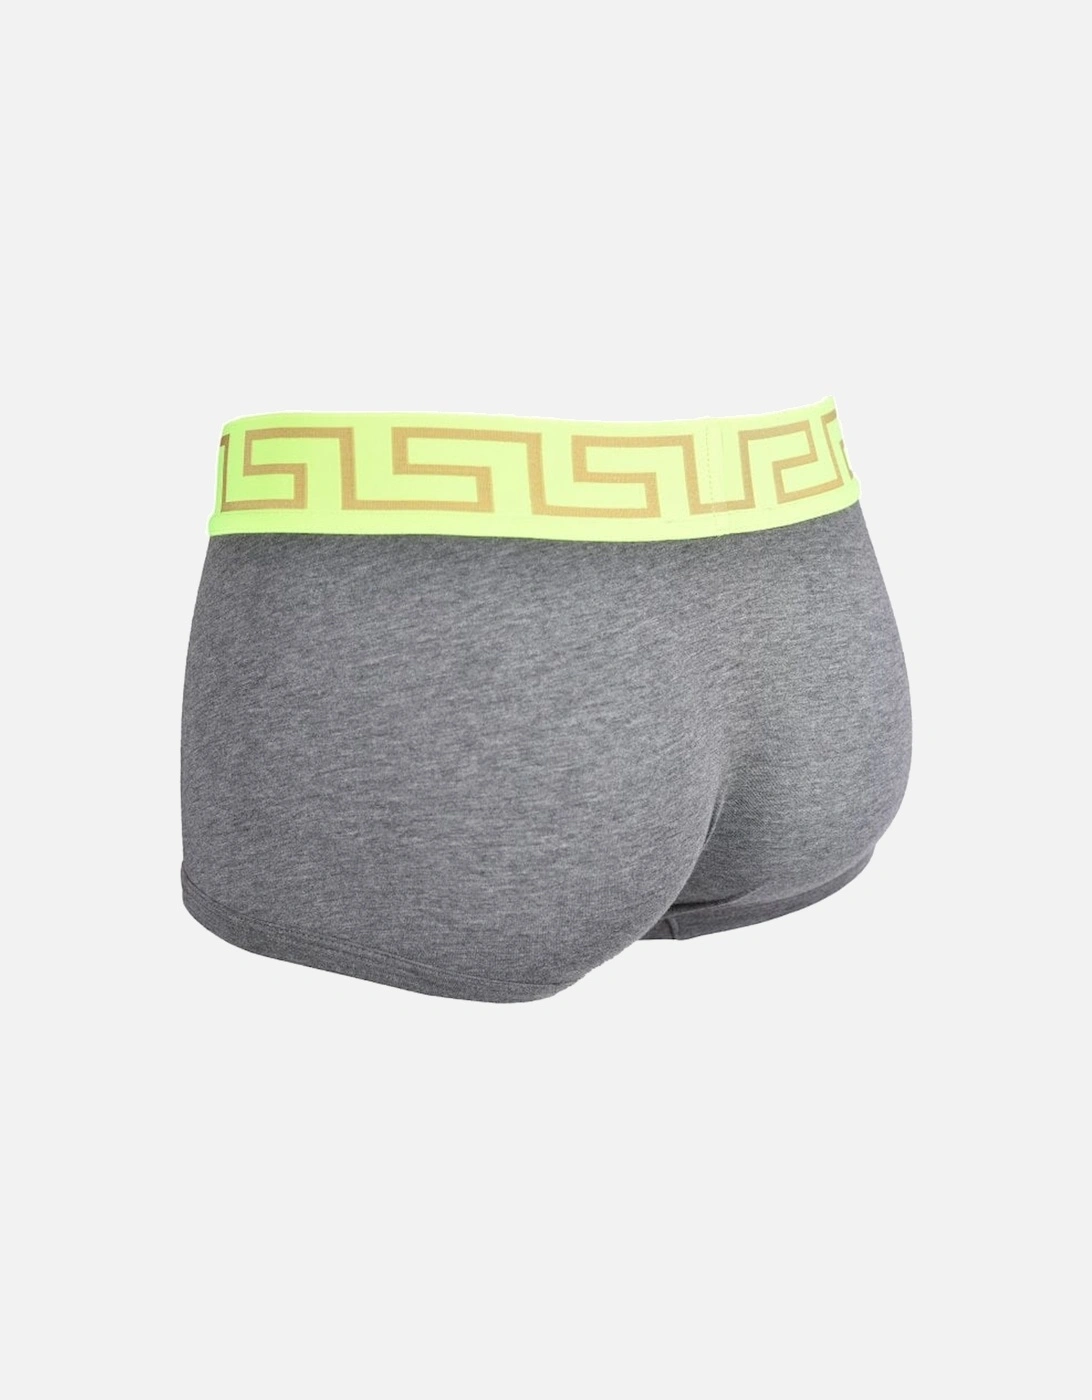 Iconic Greca Low-Rise Boxer Trunk, Grey and Neon Yellow